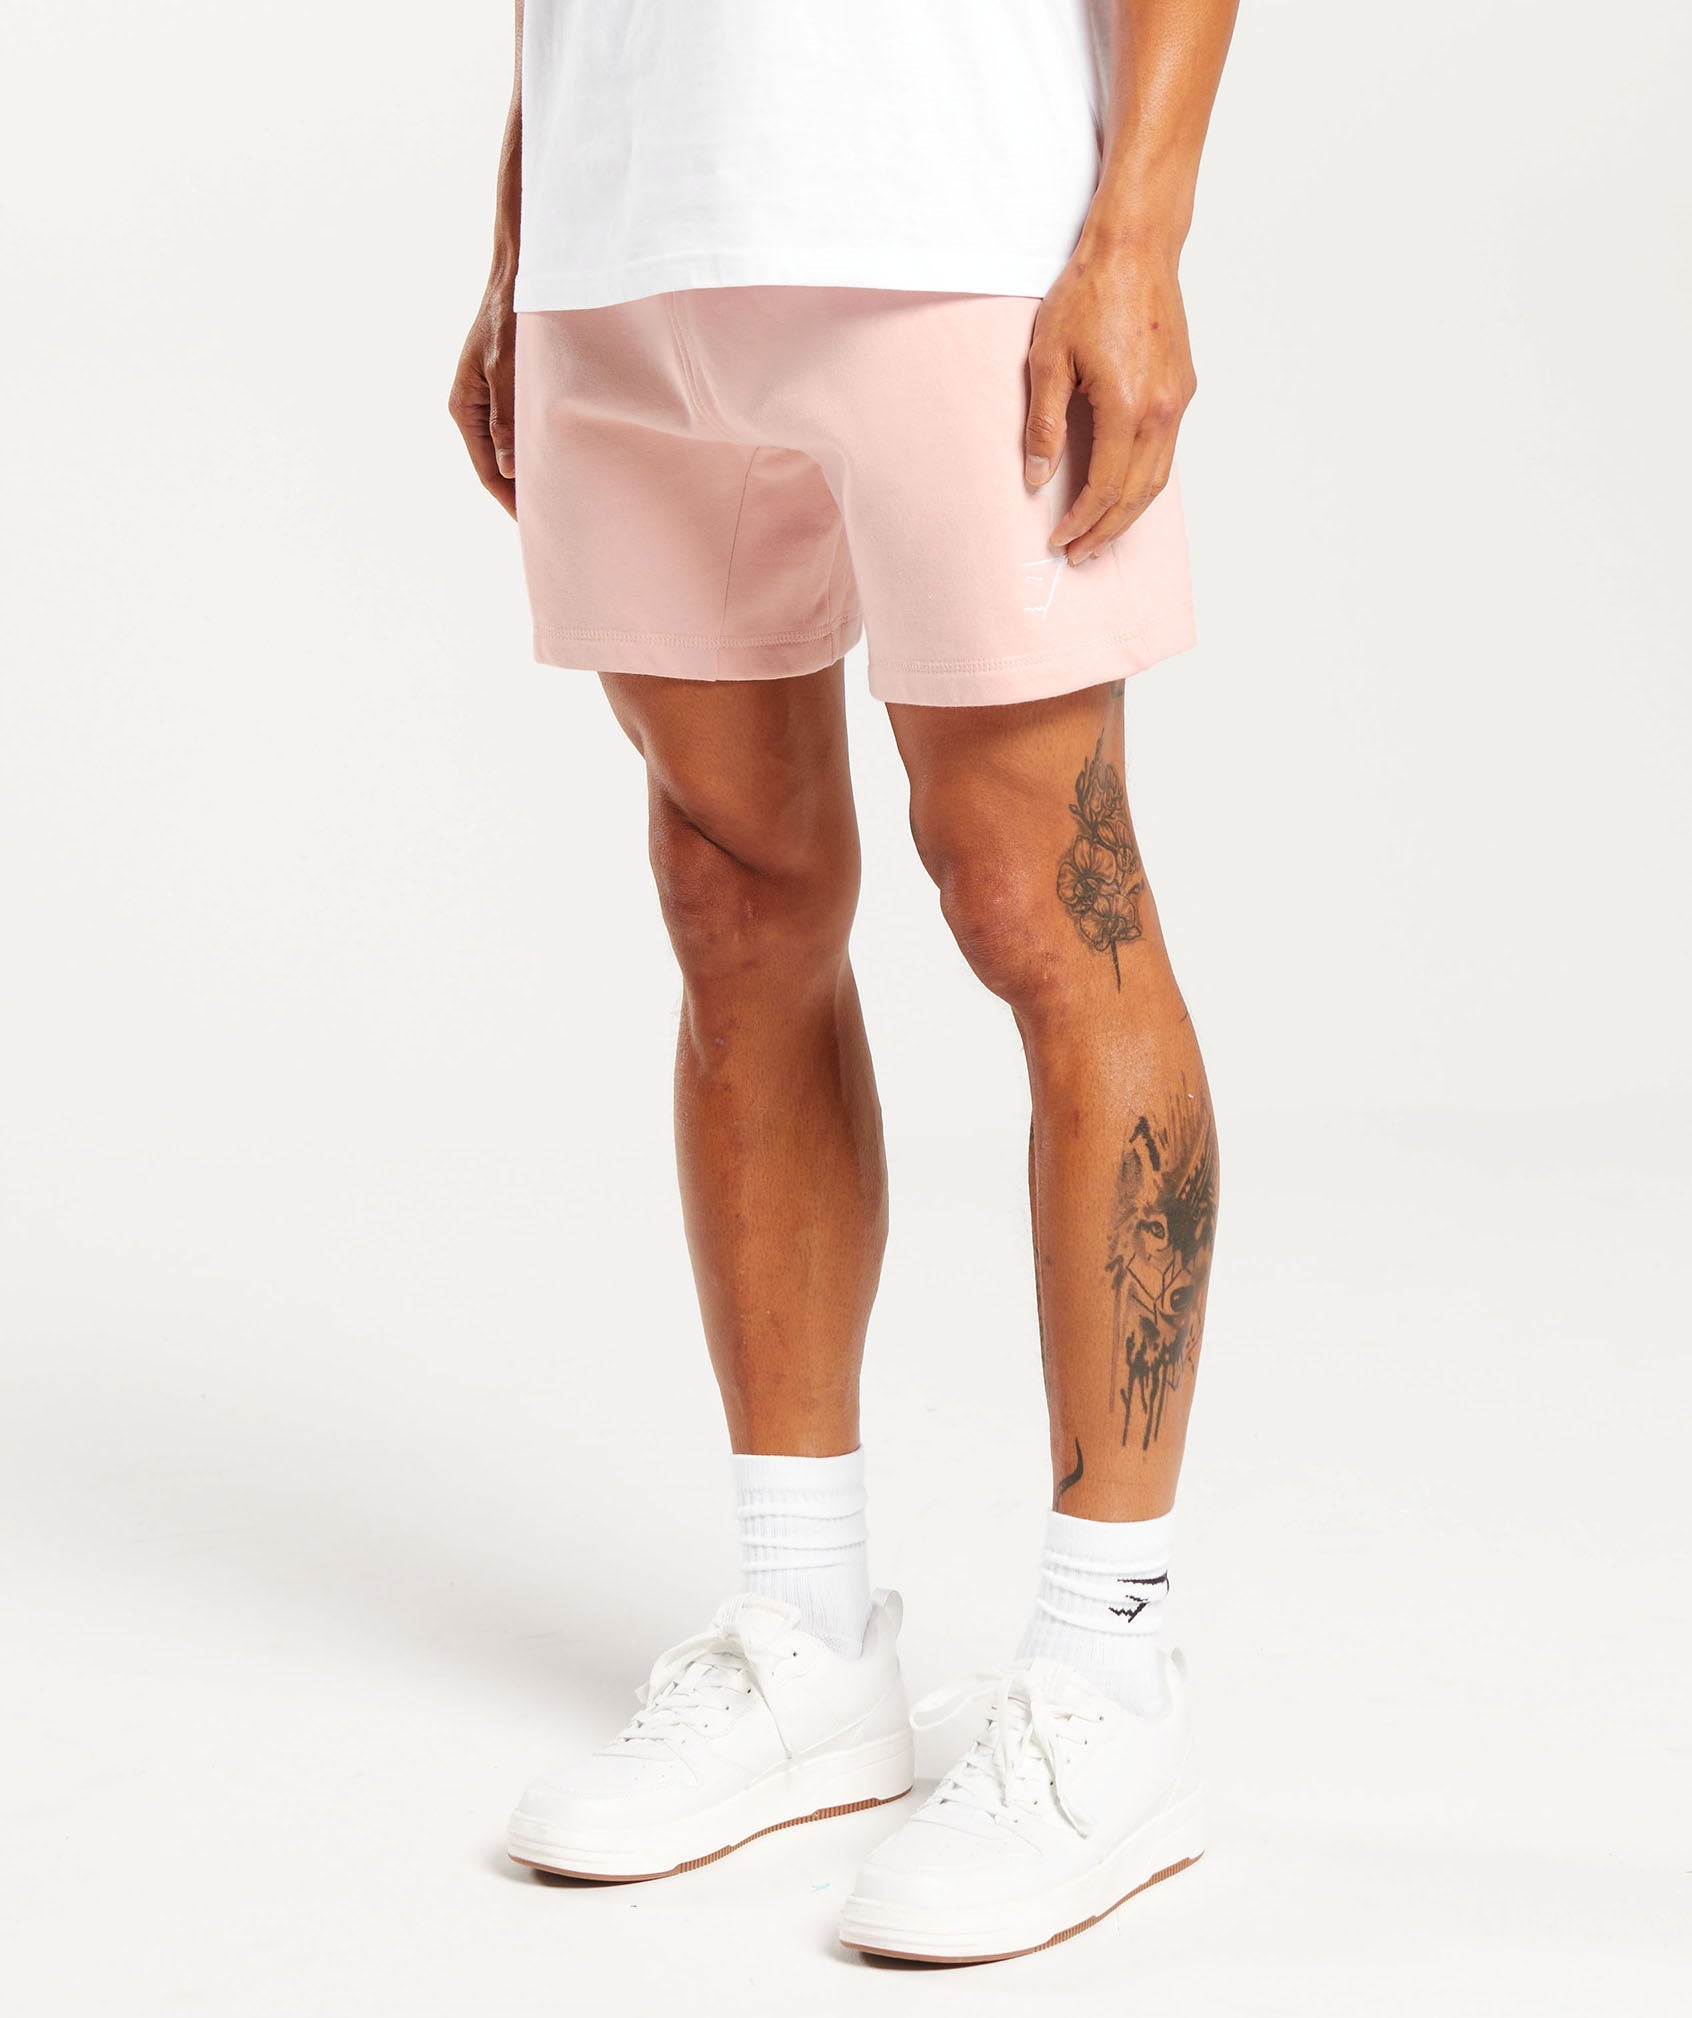 Crest Shorts in Misty Pink - view 3